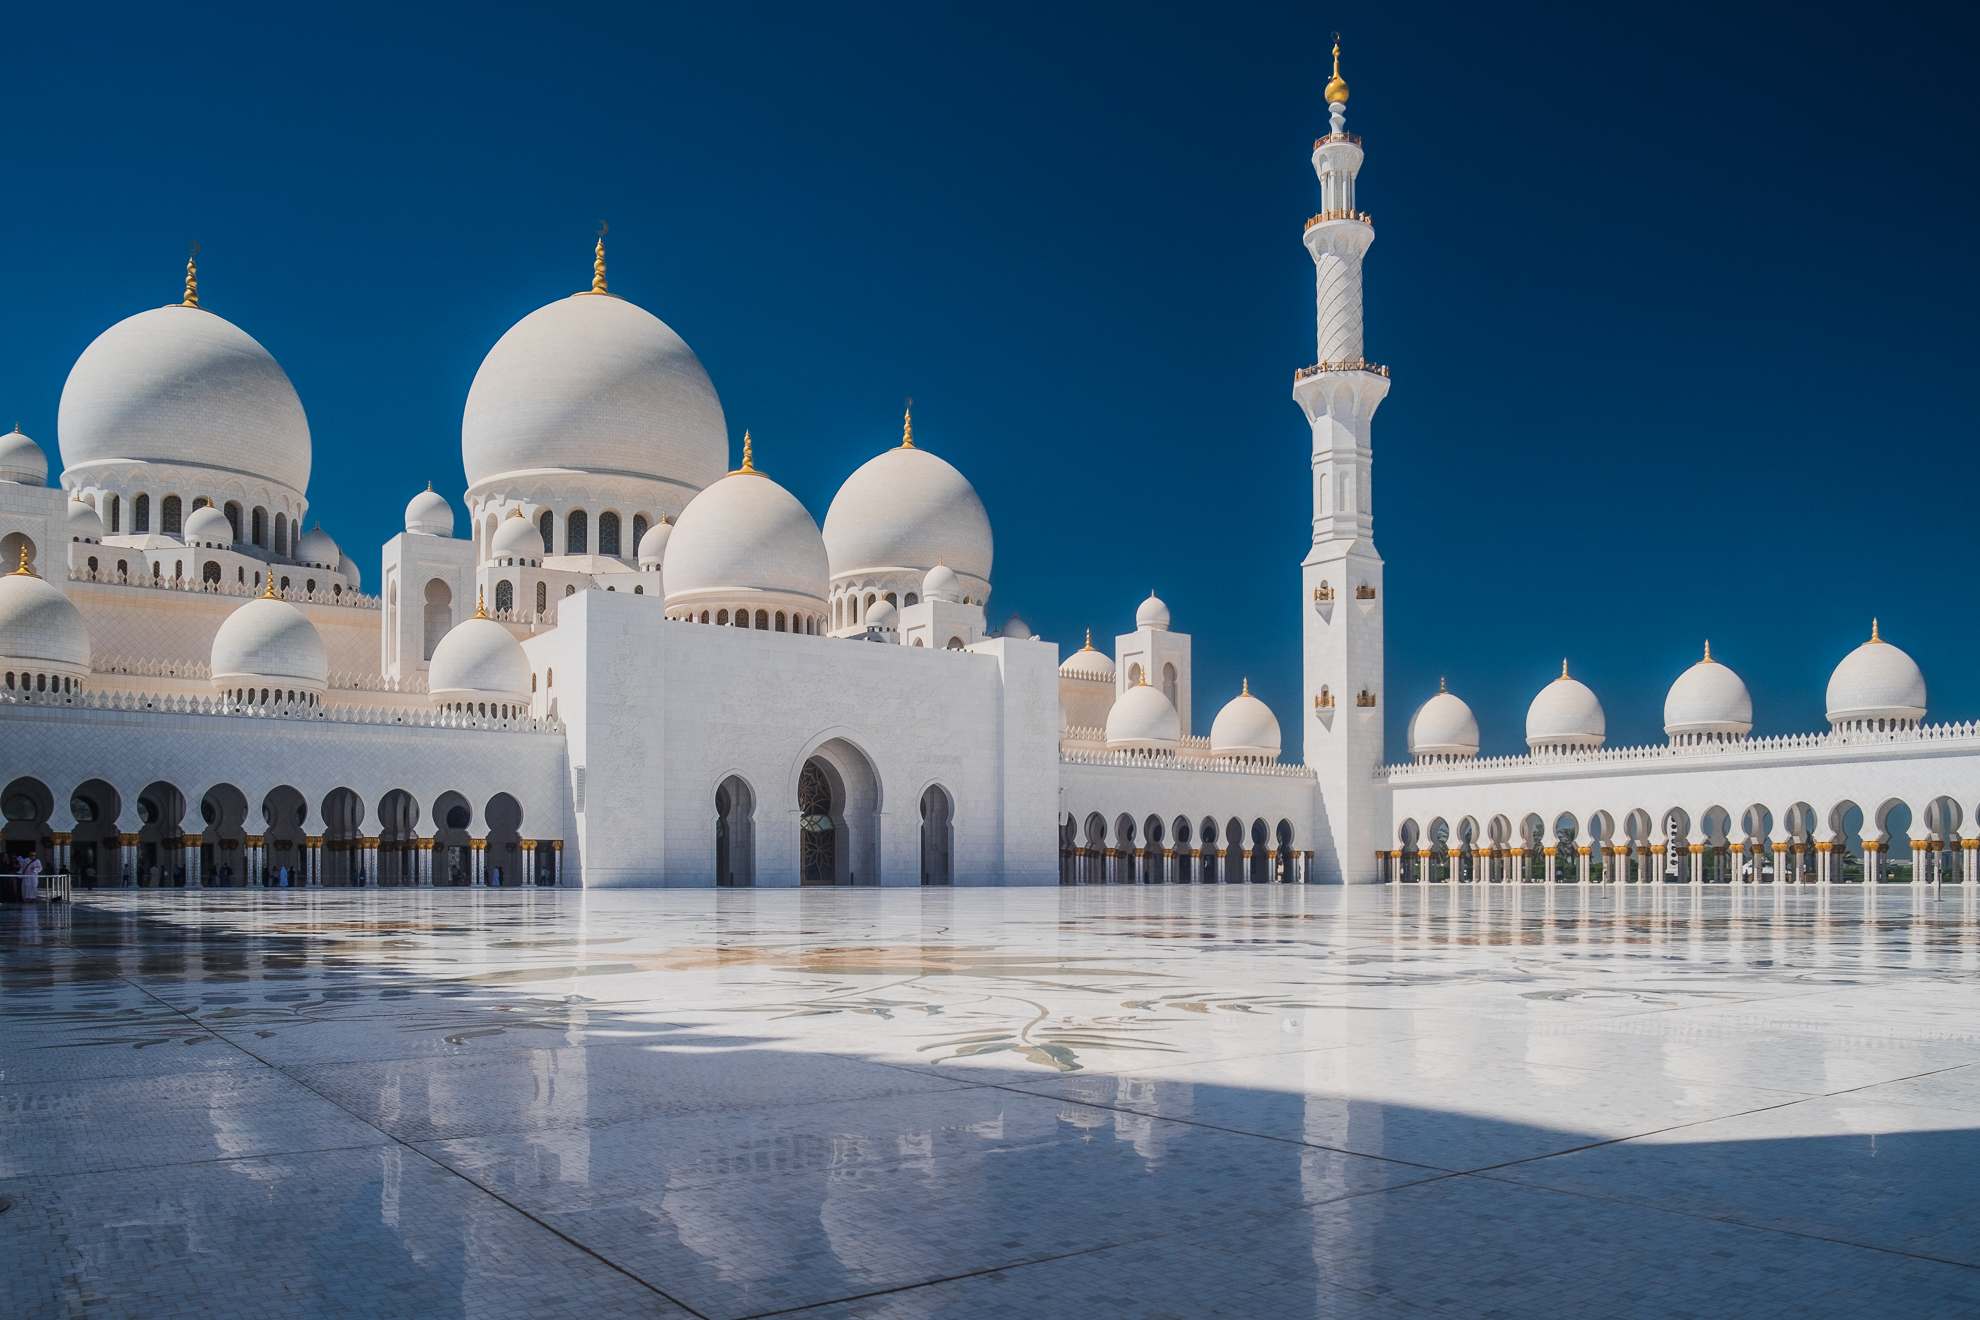 sheikh zayed grand mosque8 Picturesque Sheikh Zayed Grand Mosque in Abu Dhabi